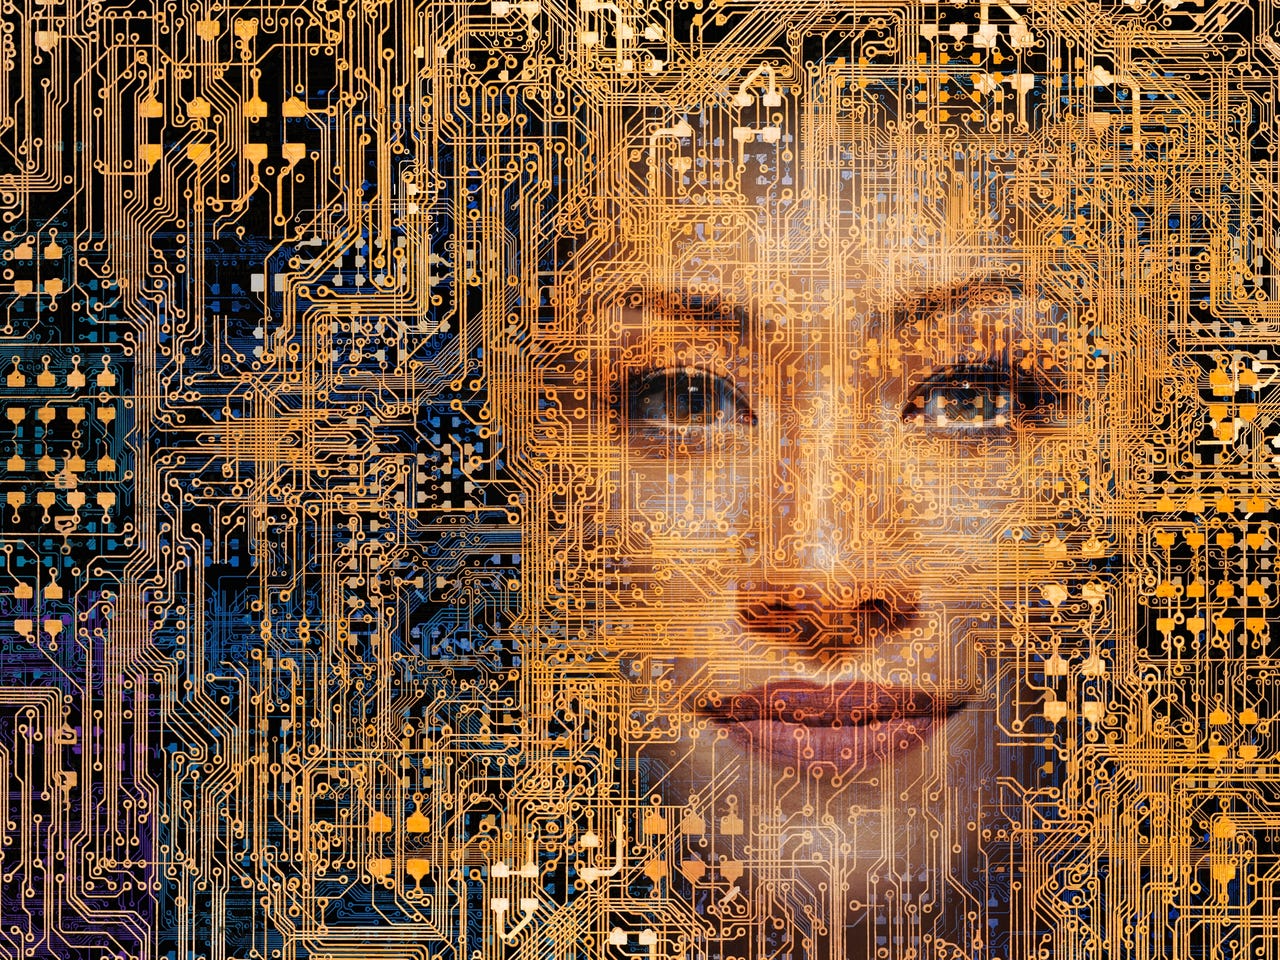 woman's face appears within a network of computer circuitry